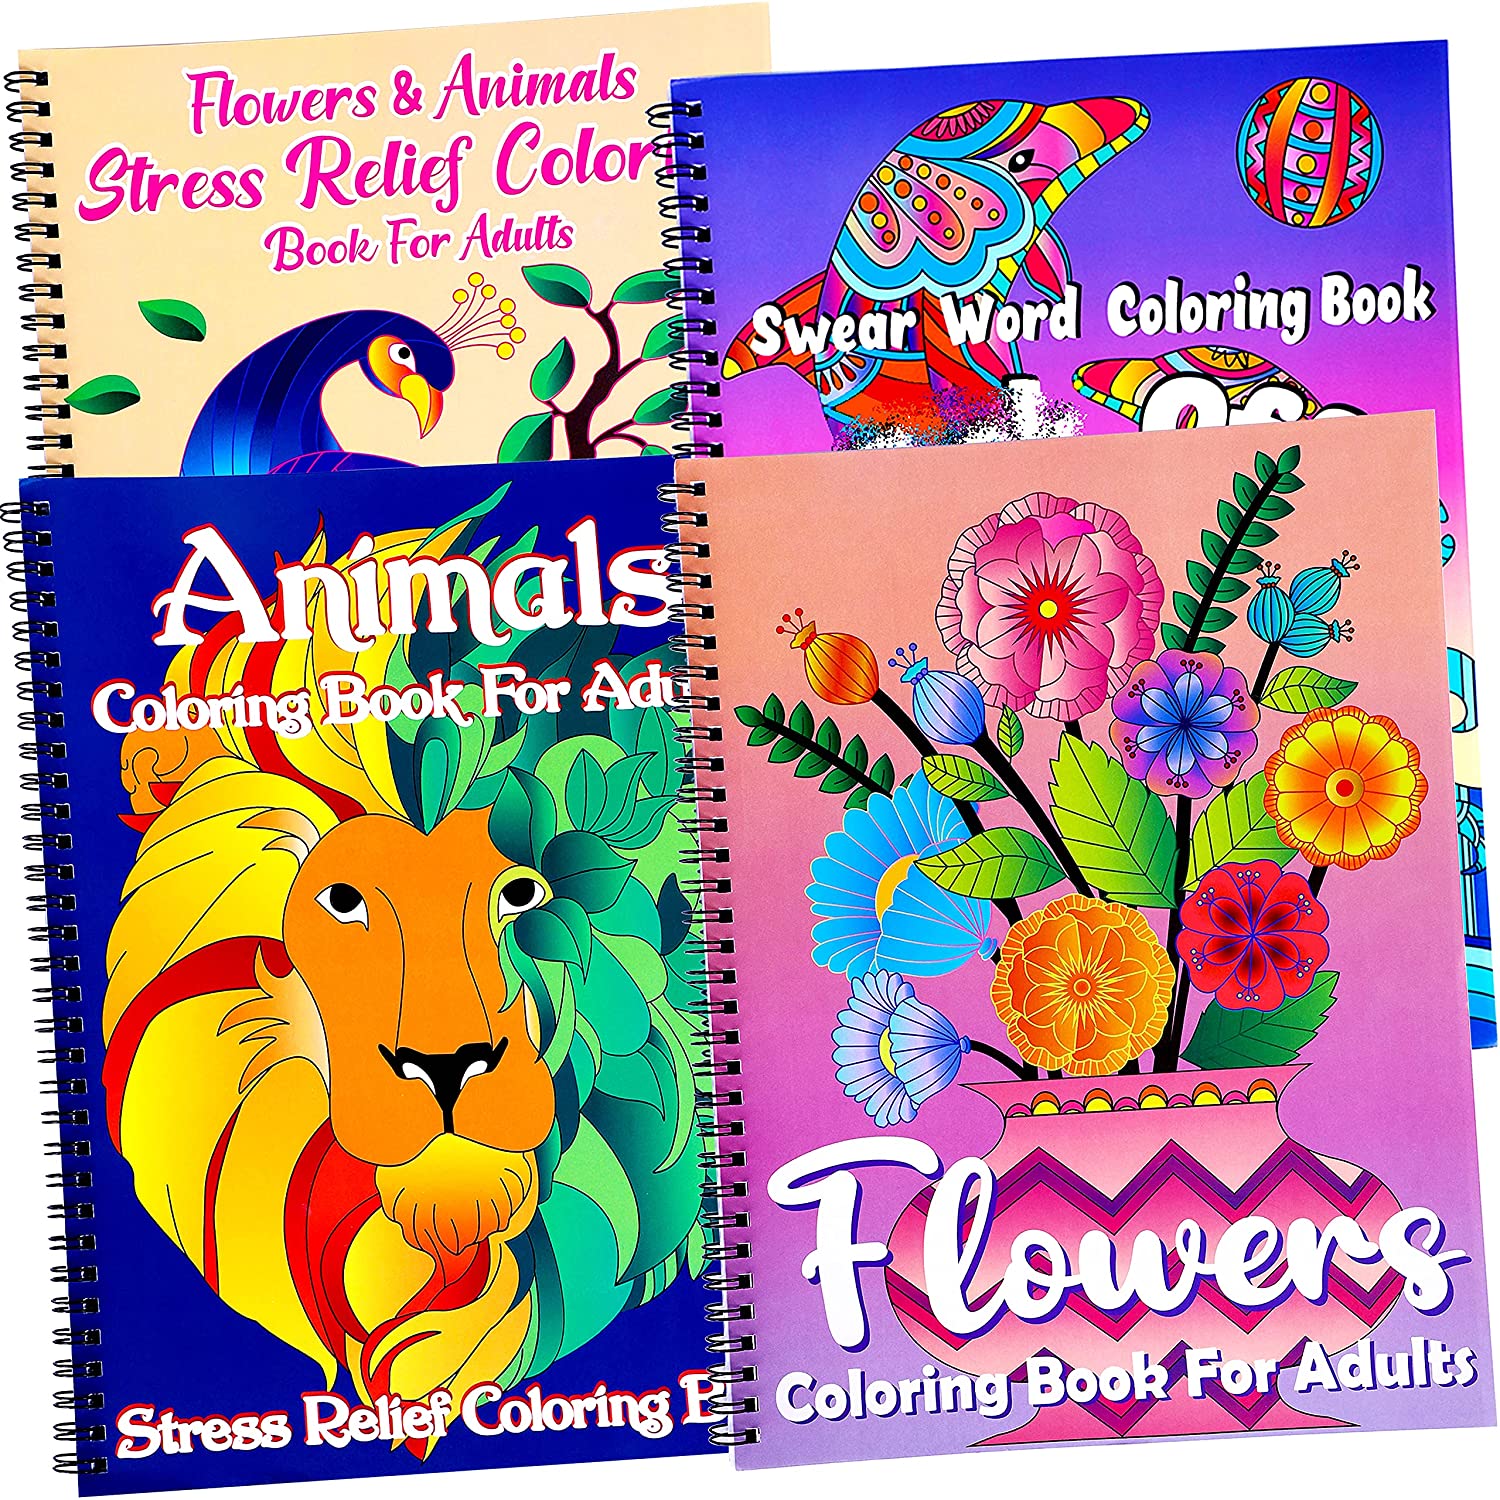 for　Coloring　Men　HTAIGUO　Gifts　Set　Flowers　Activities　Animals　Birthday　Assorted　Adult　Women　Includes　Books　Swear/Curse　Stress　Word+　Themes-　Animals,　Relief　Fun　Relaxation　Motivational　Flowers